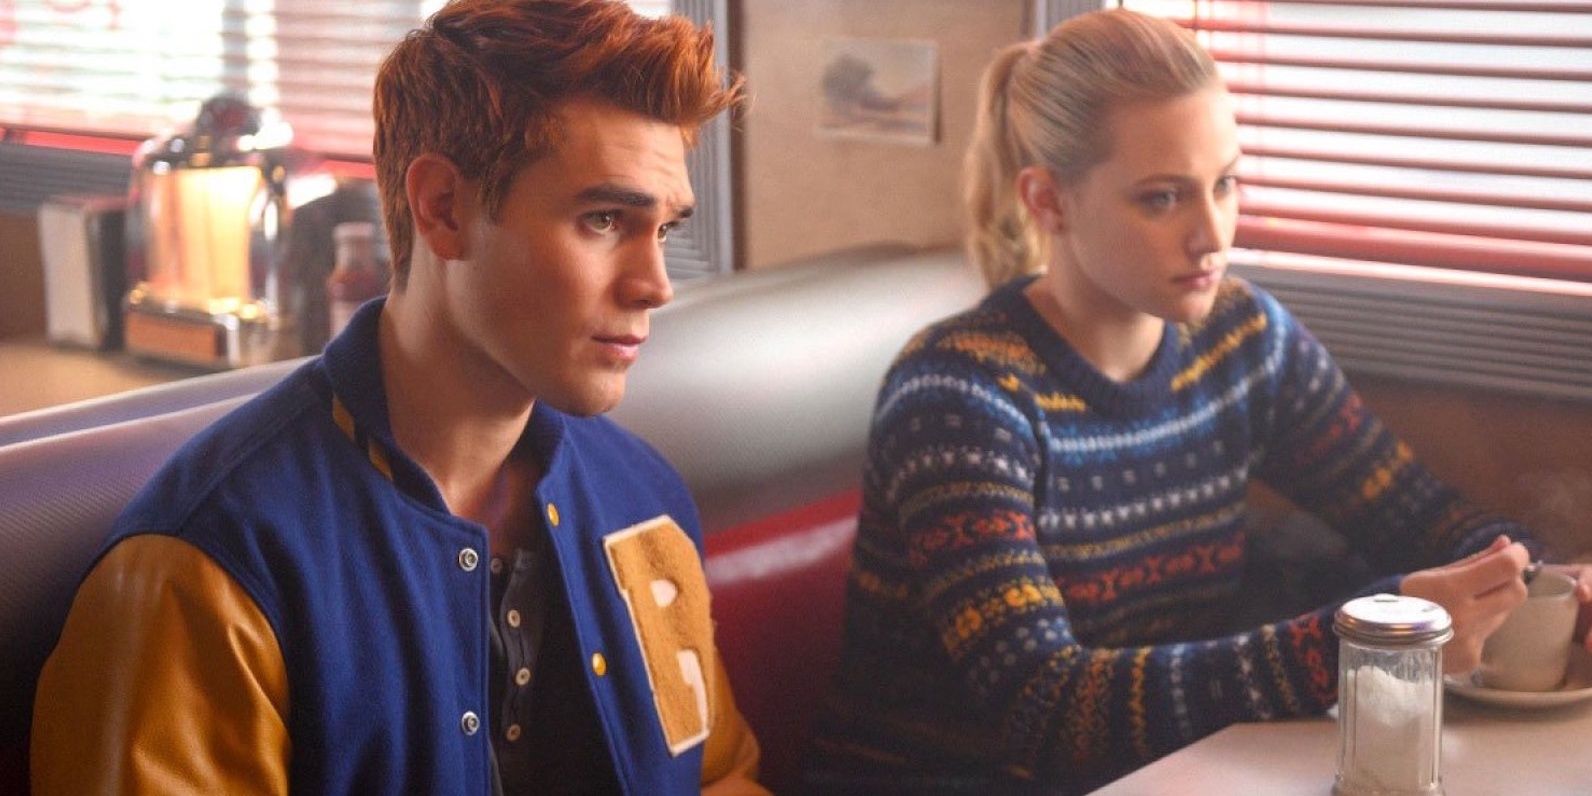 Riverdale The 10 Saddest Things About Archie RELATED Riverdale 10 Things You Forgot From The First Episode